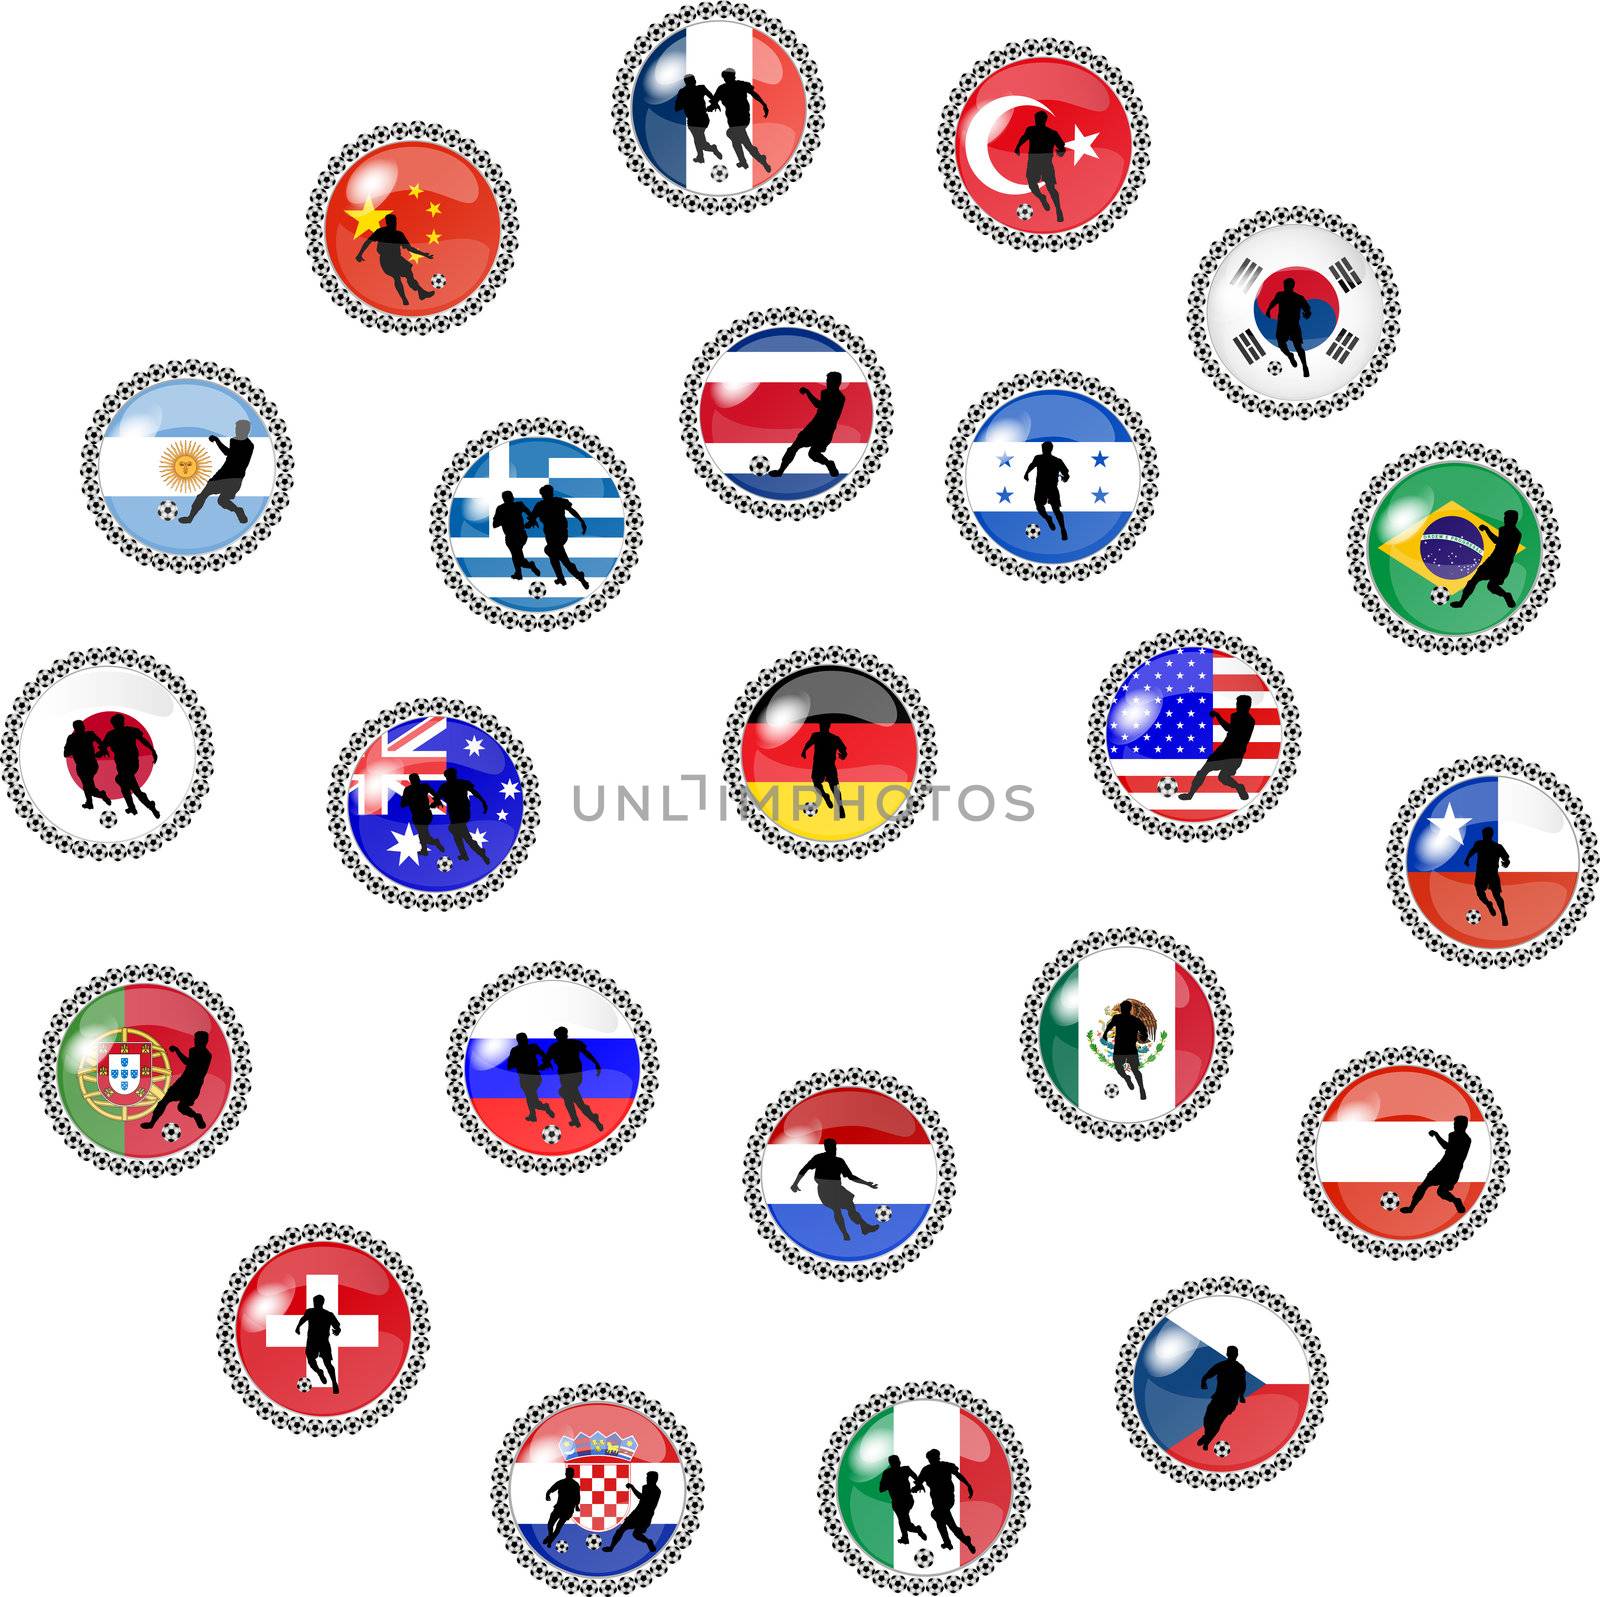 illustration of a set of WM soccer buttons by peromarketing